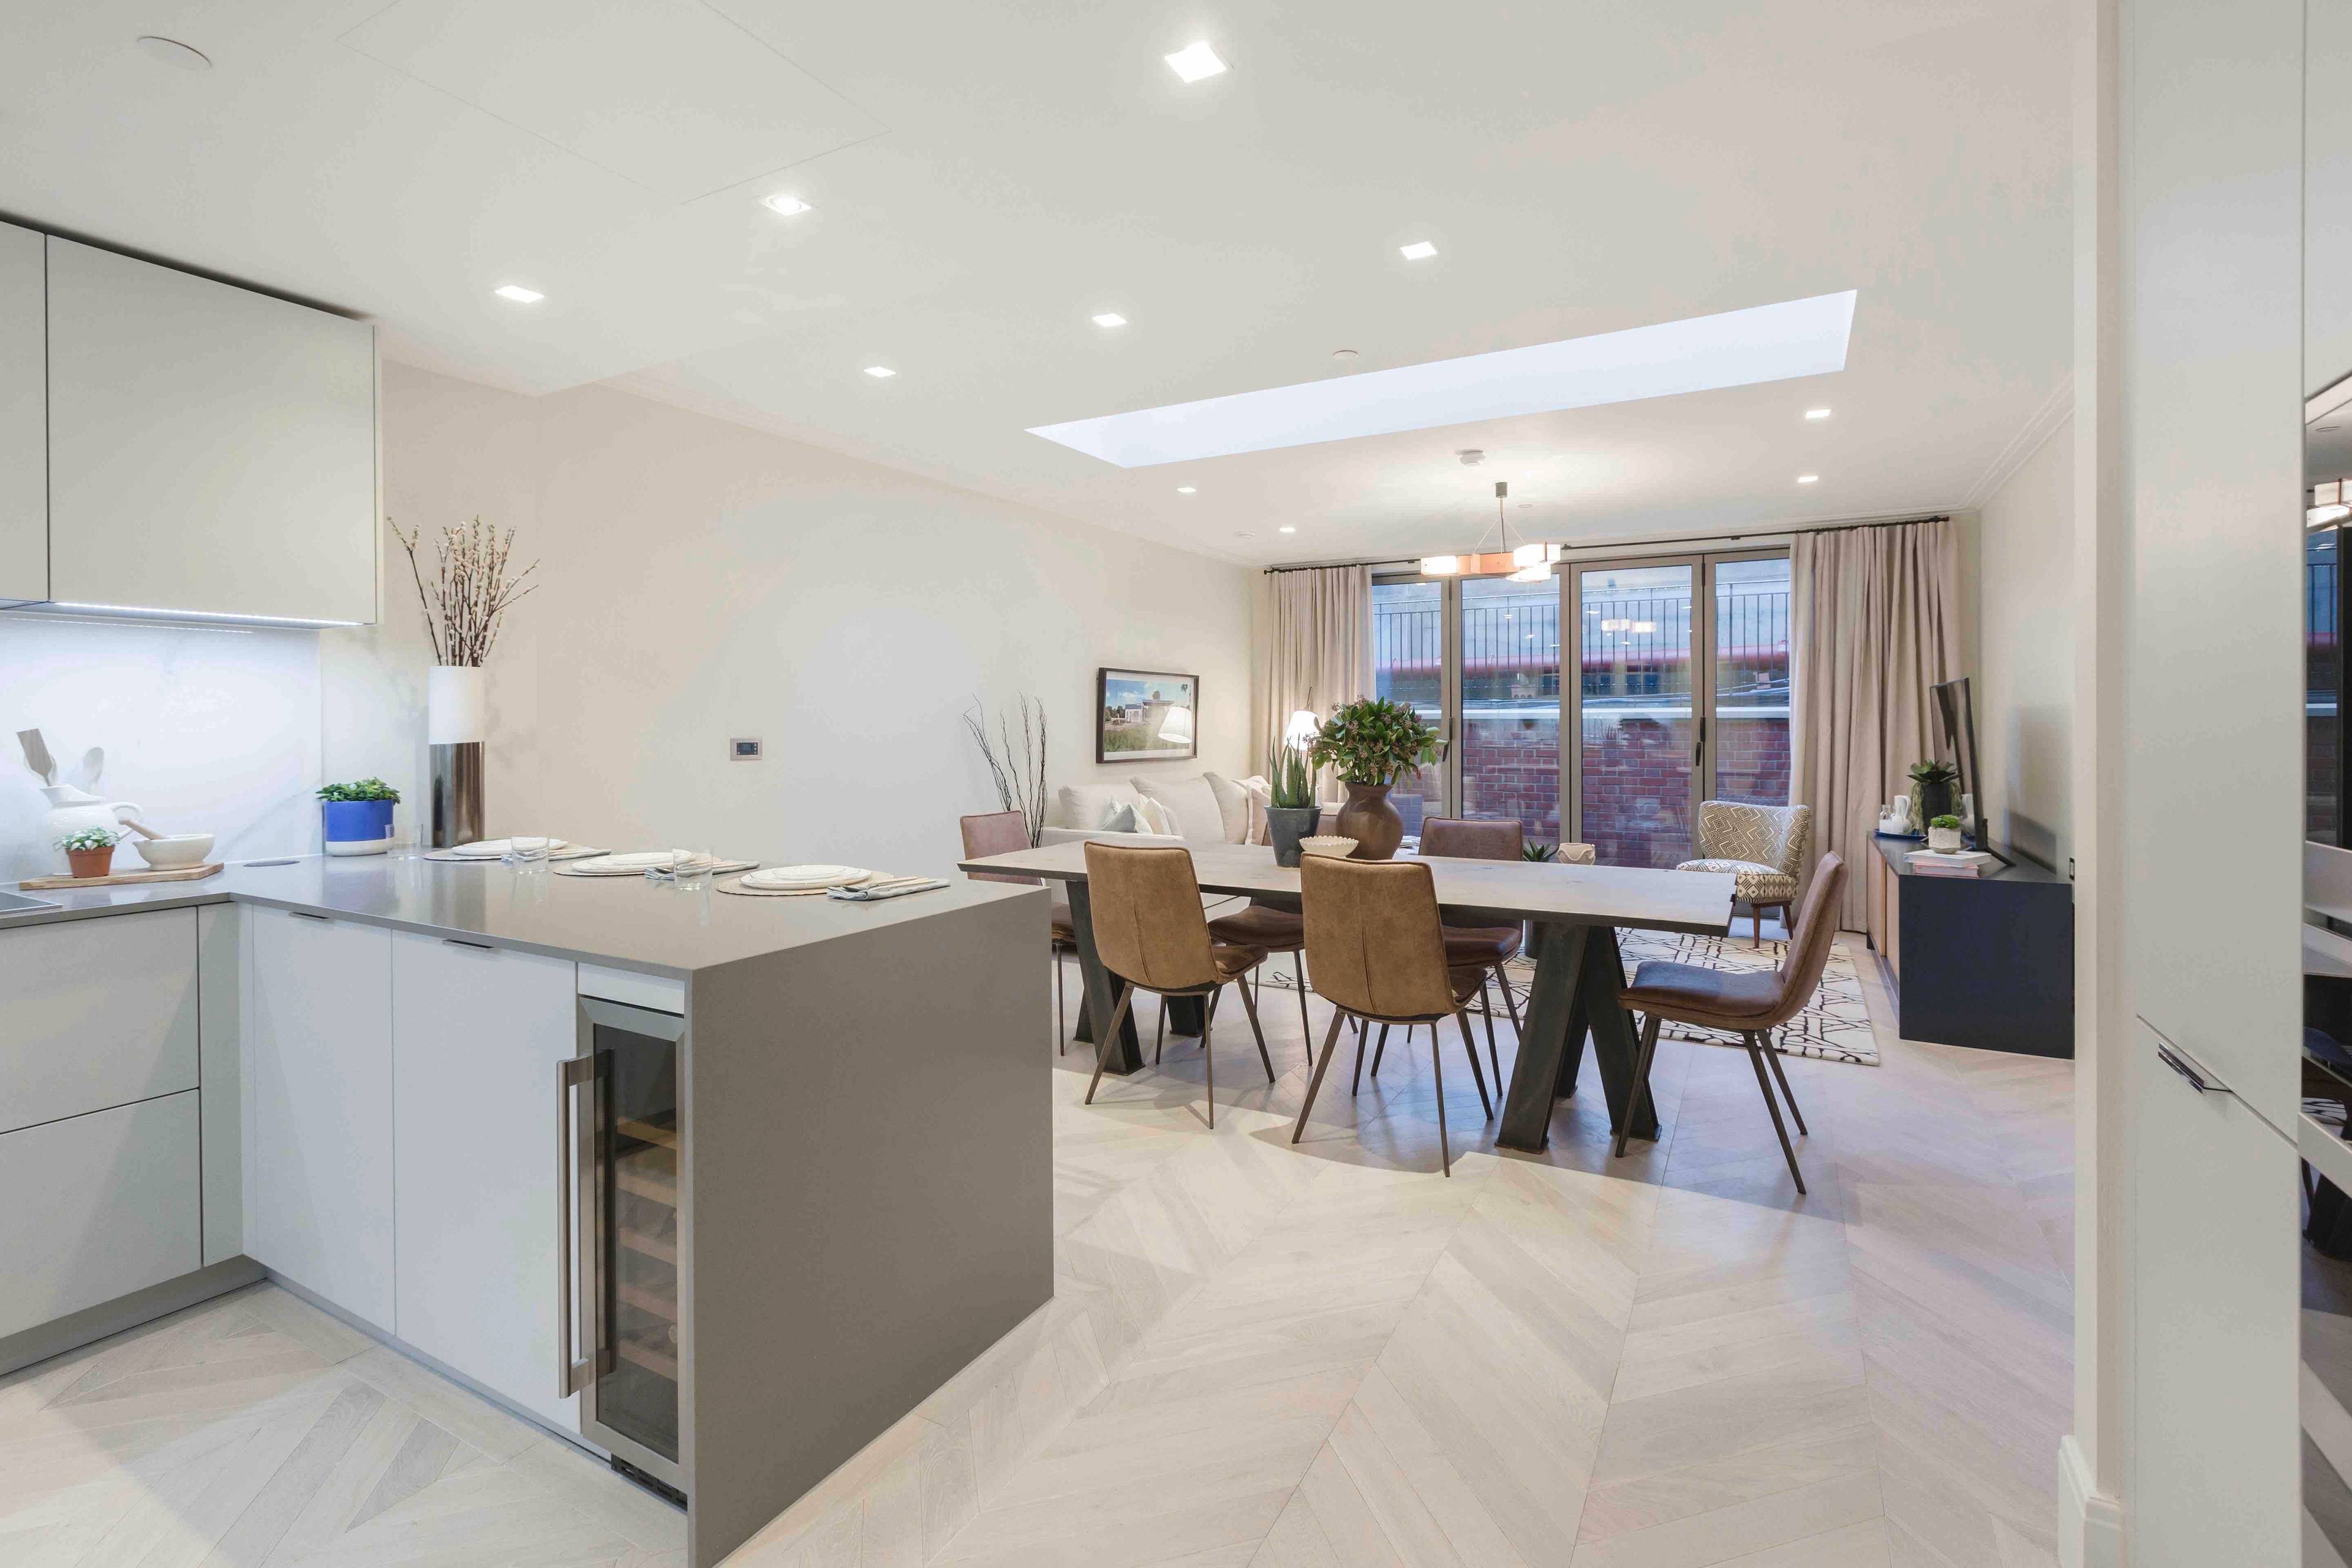 A spectacular four bedroom luxury Townhouse in exclusive area of Hampstead, London